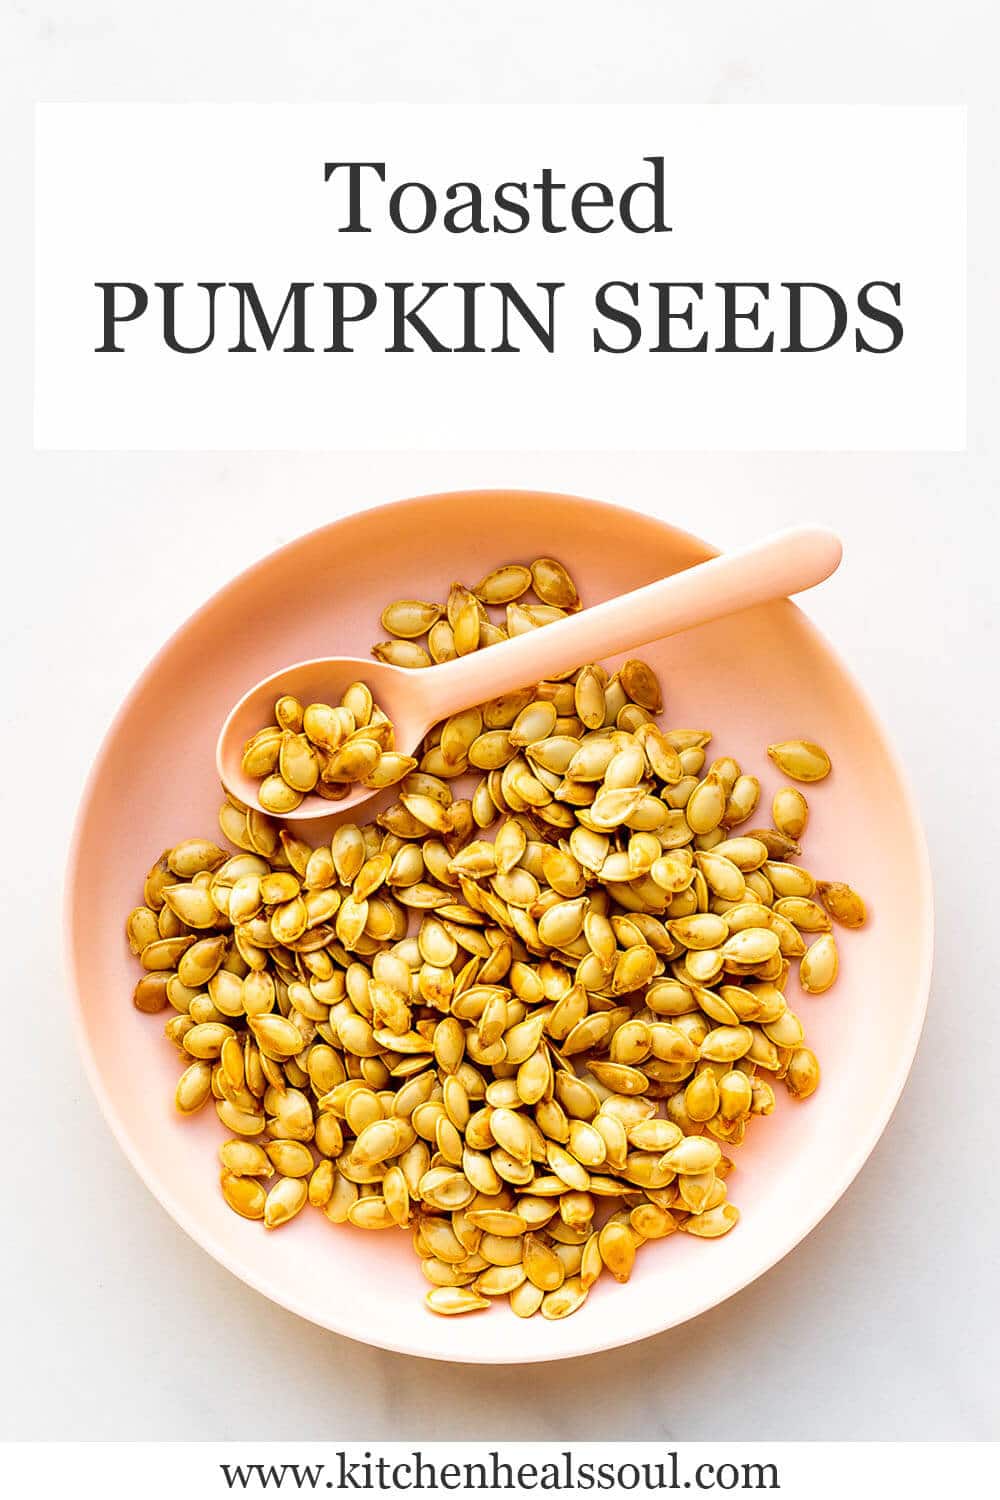 Roasted pumpkin seeds in a pink bowl with a pink spoon for serving